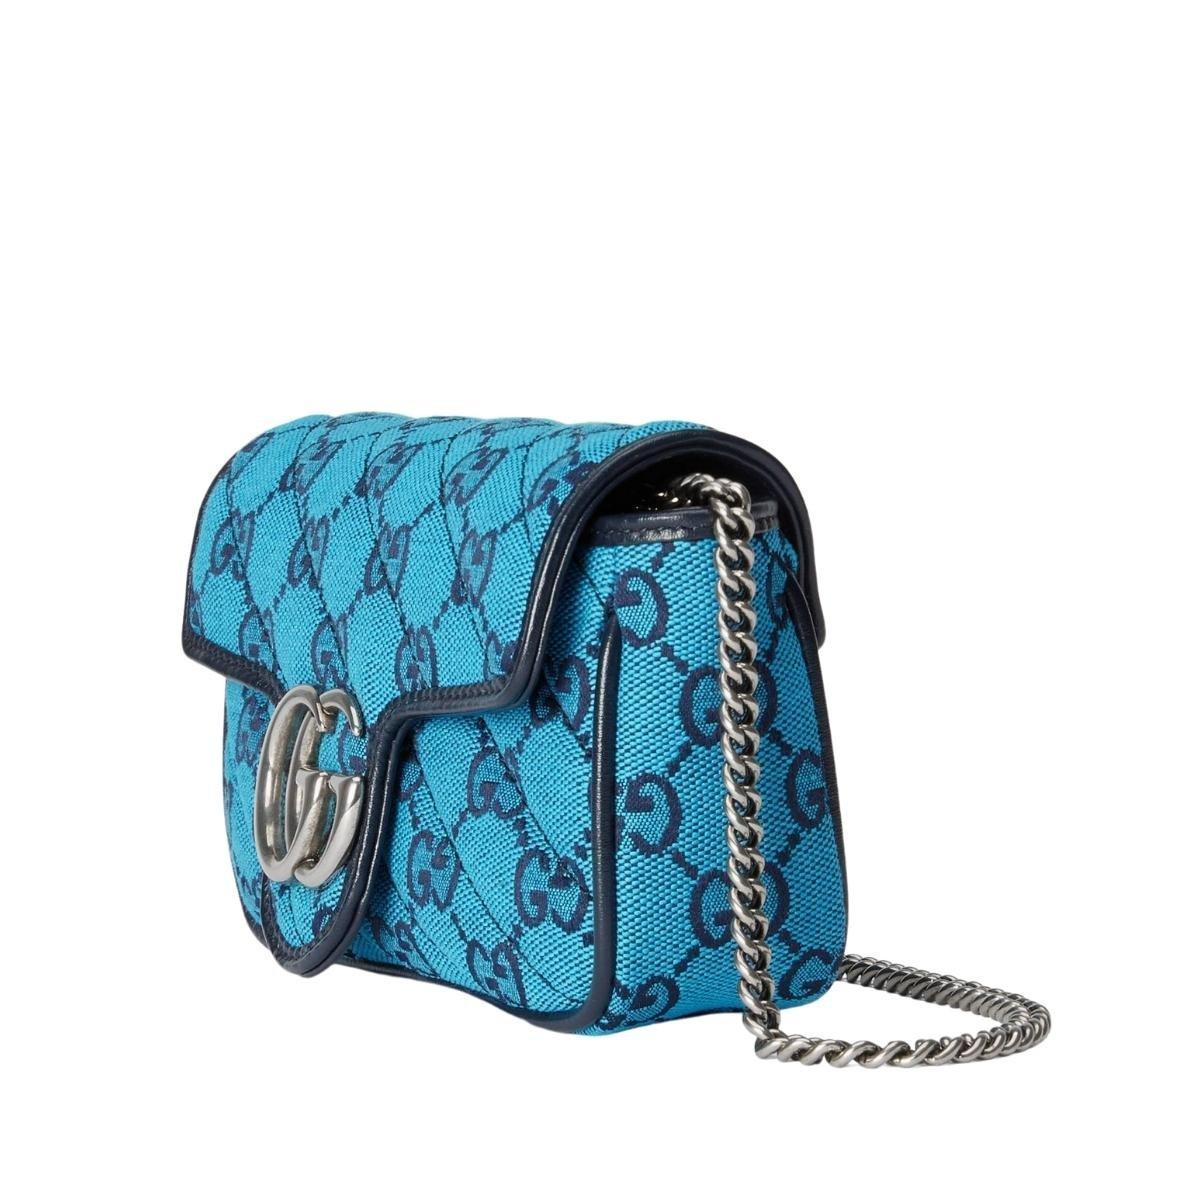 This GG Marmont super mini bag is part of the GG Multicolour collection
Light blue and blue diagonal matelassé GG canvas
Blue leather trim
Silver-toned hardware
Attached key ring that can attach to a separate bag
Double G
Chain shoulder strap with